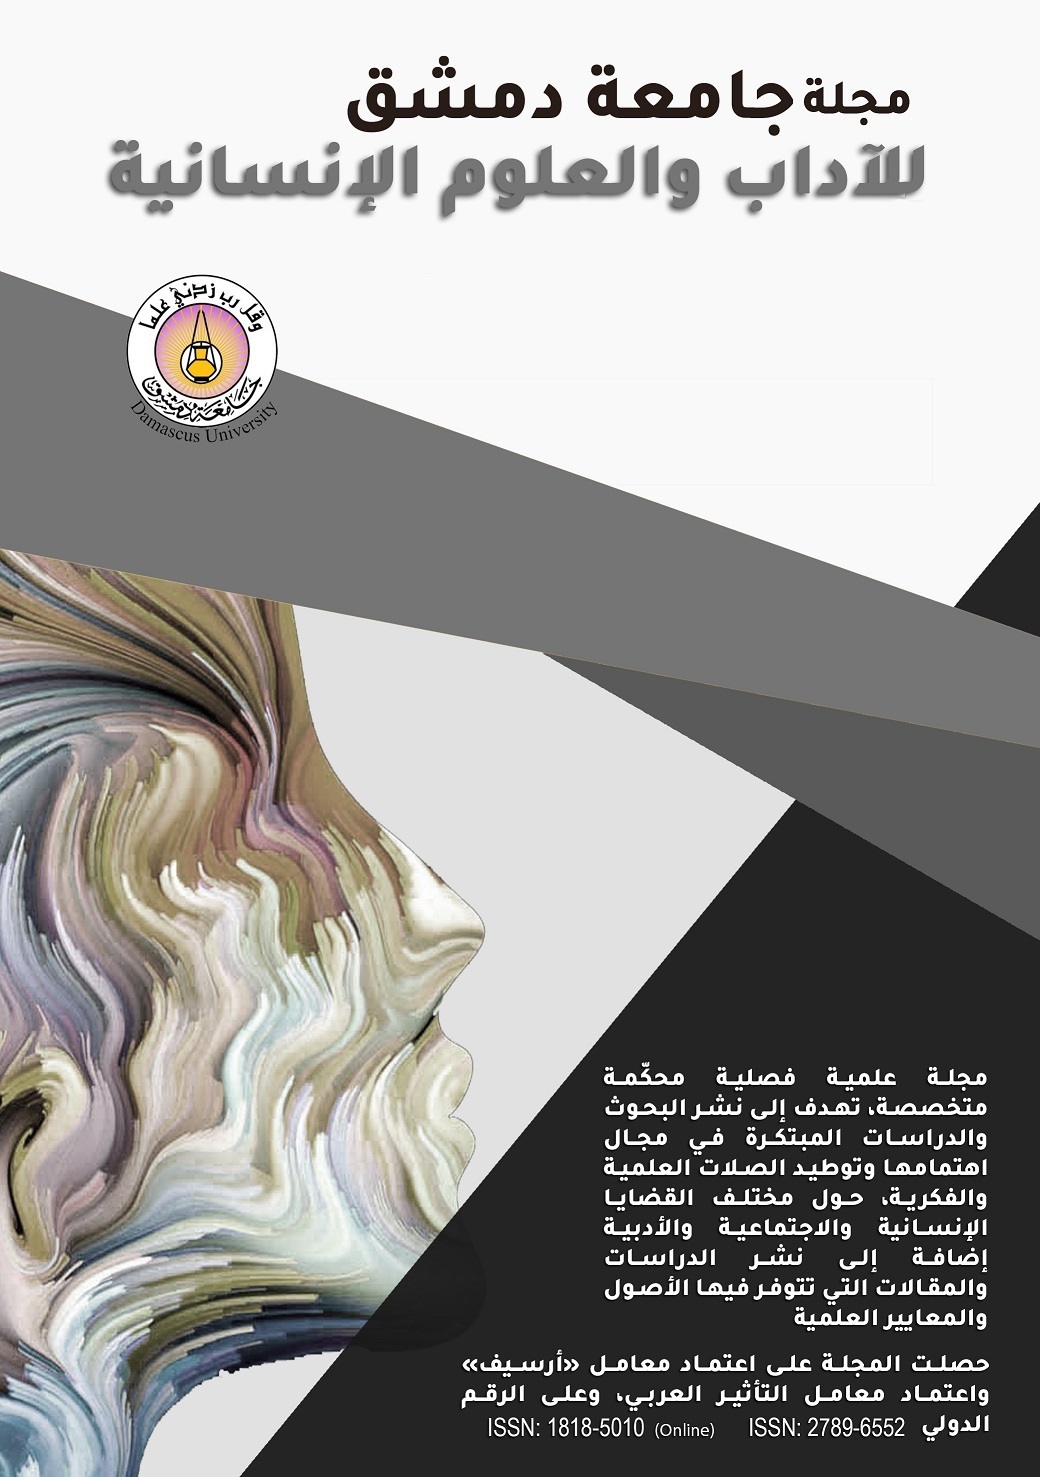 					View Vol. 36 No. 1 (2020):  Damascus University Journal of Arts And Humanities
				